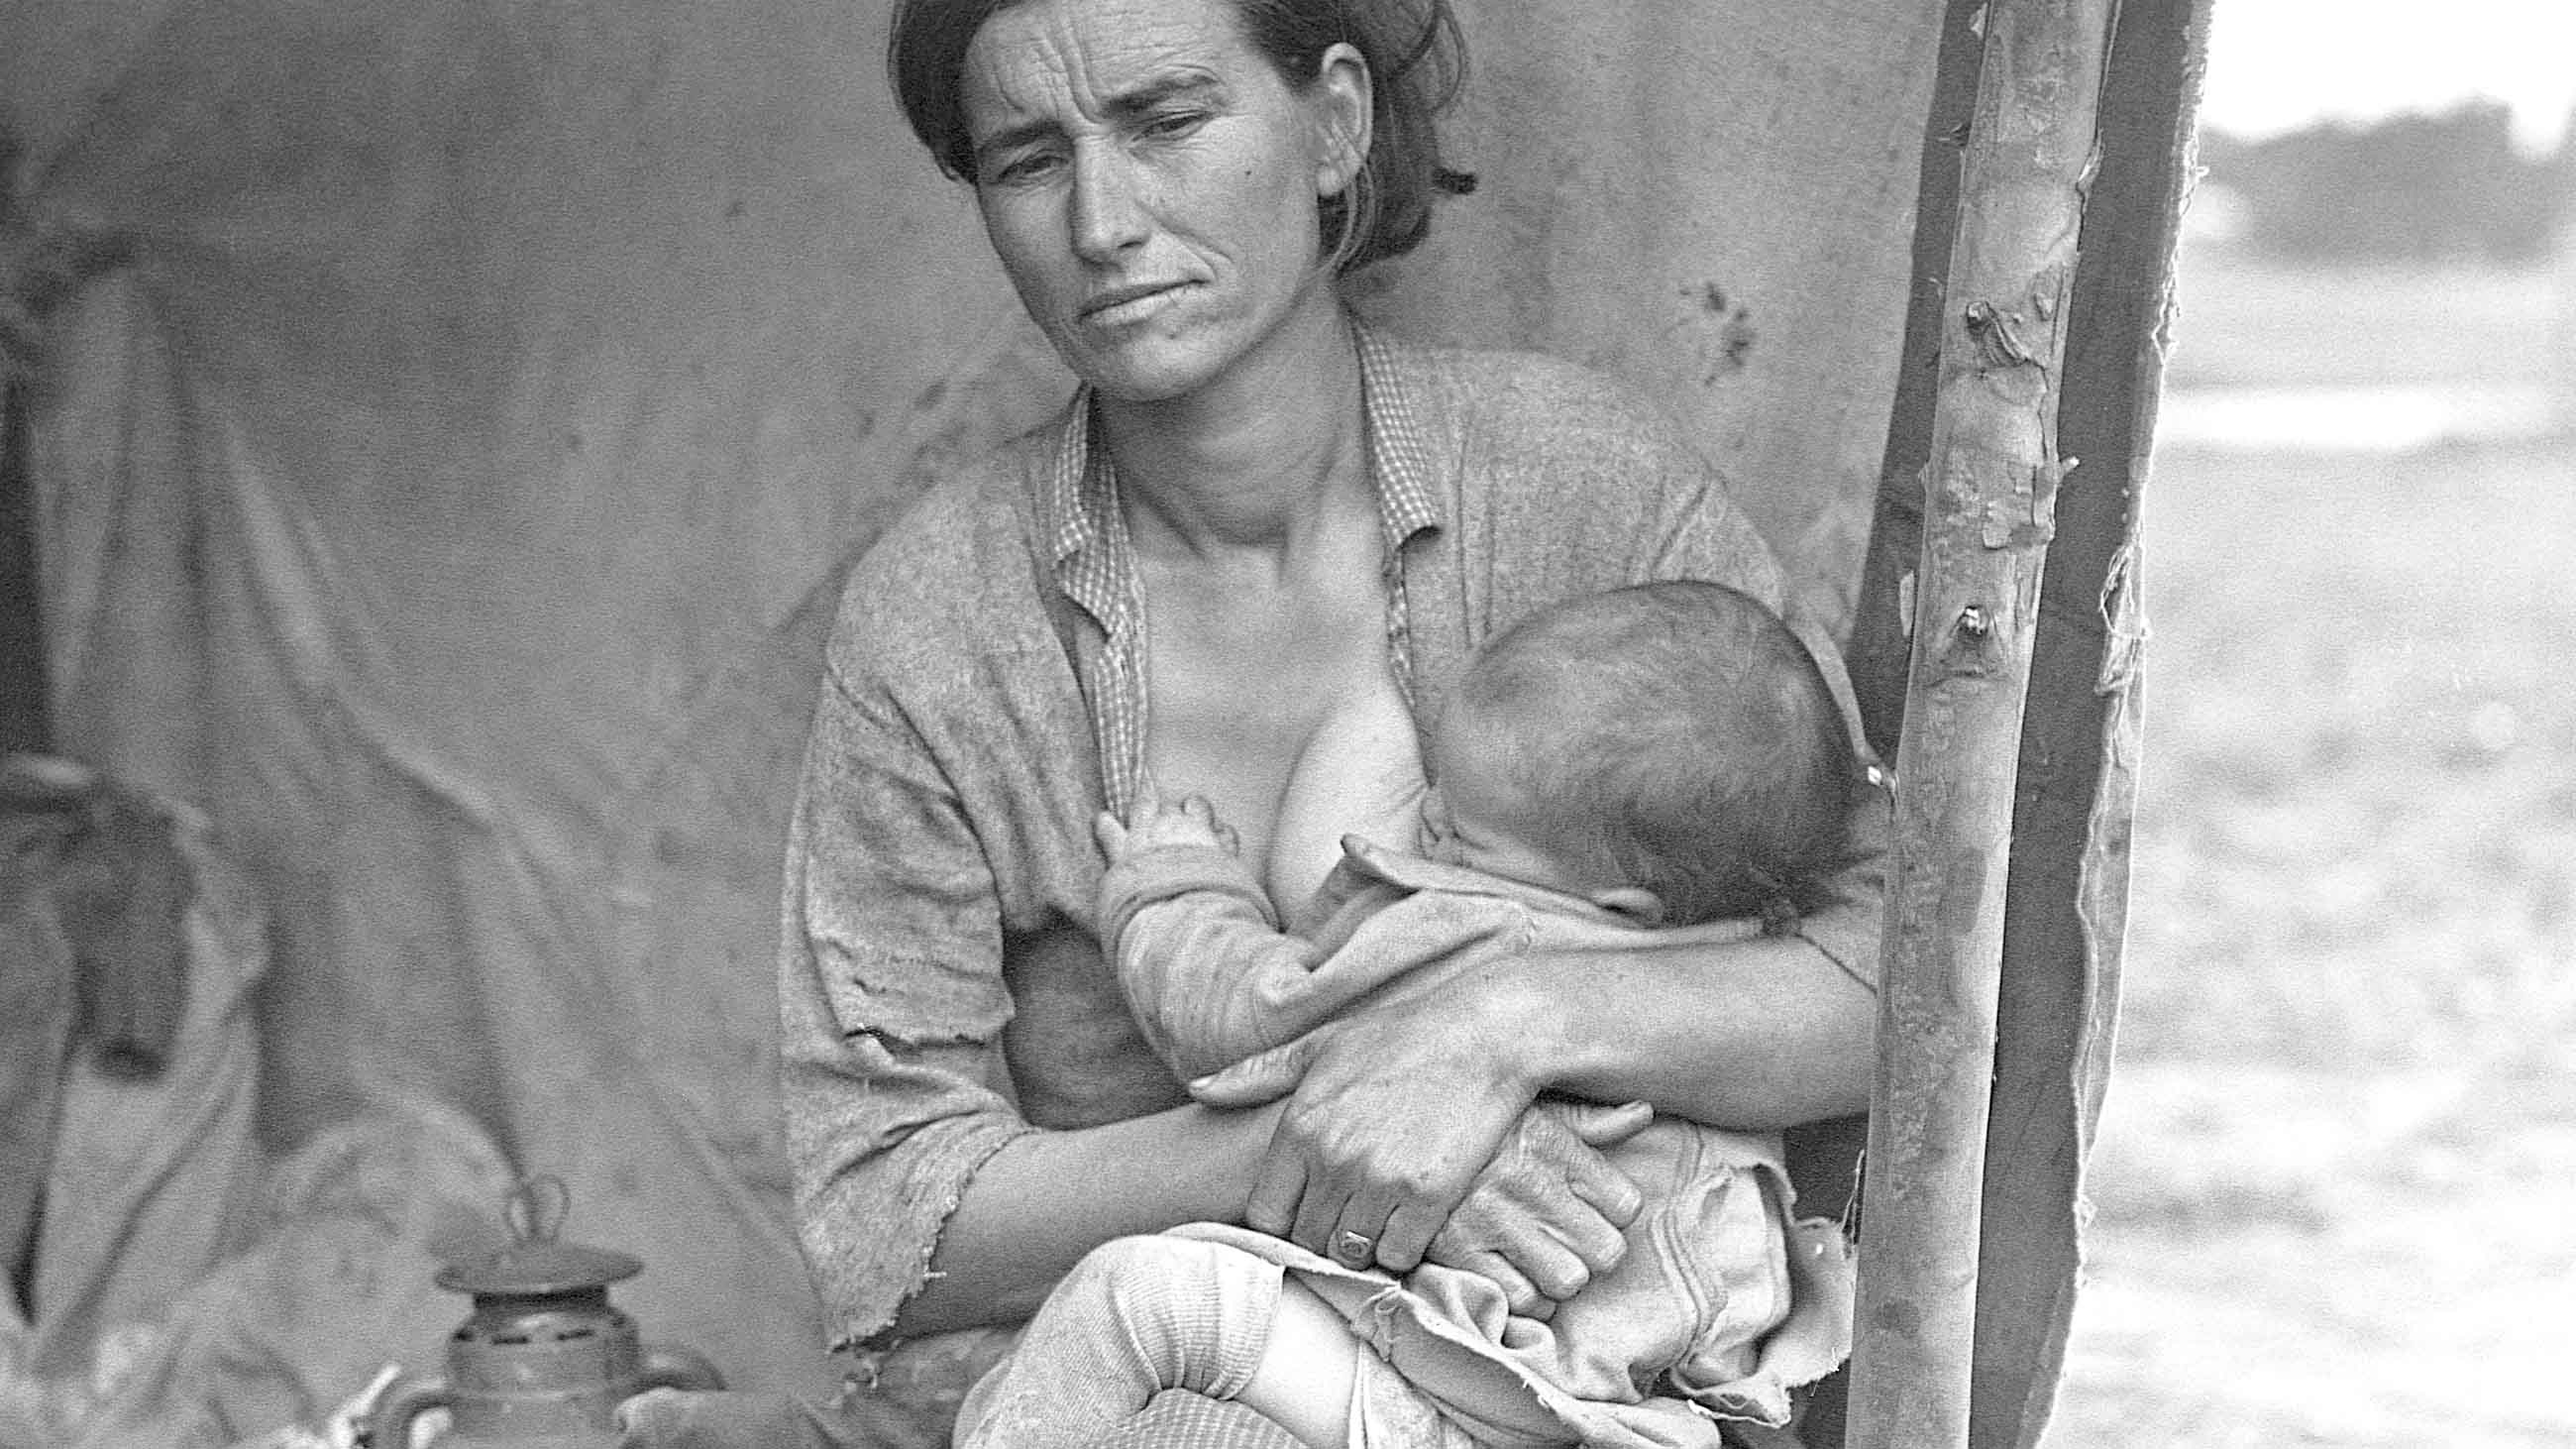 Breastfeeding takes even more energy than pregnancy. A mother and child in a California migrant workers’ camp, 1936.